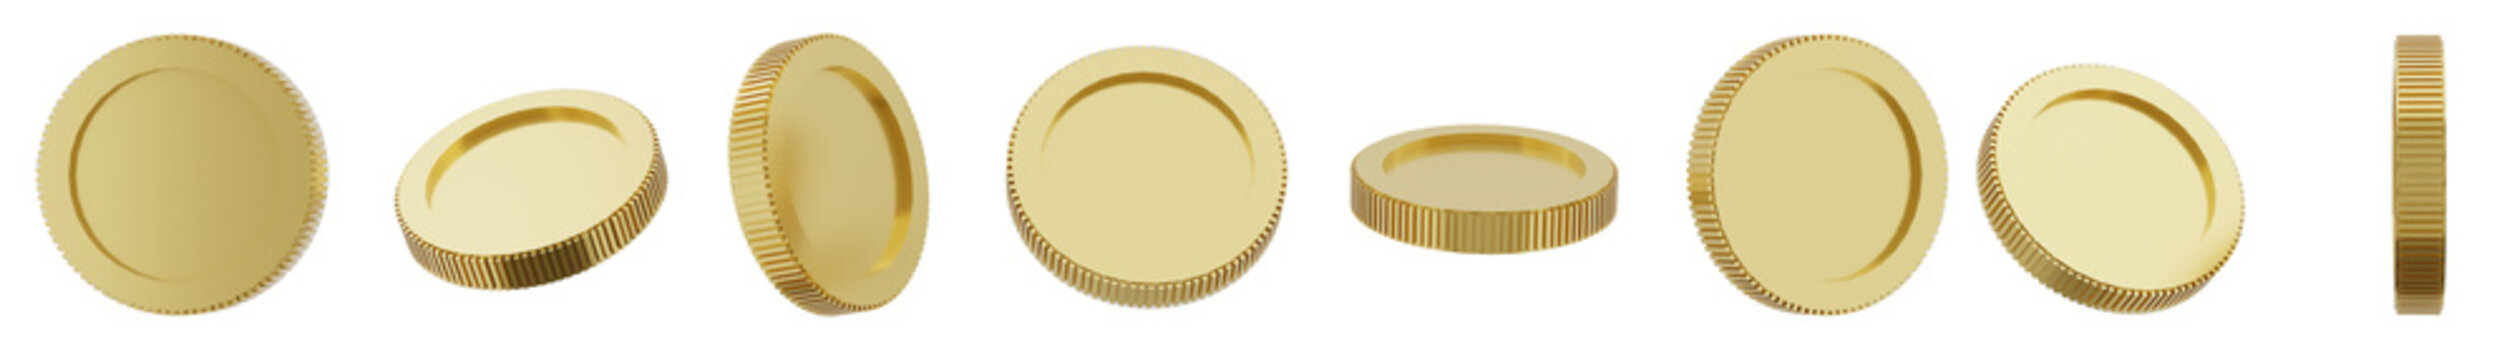 Set of gold coin in different formation and position. 3d render illustration.